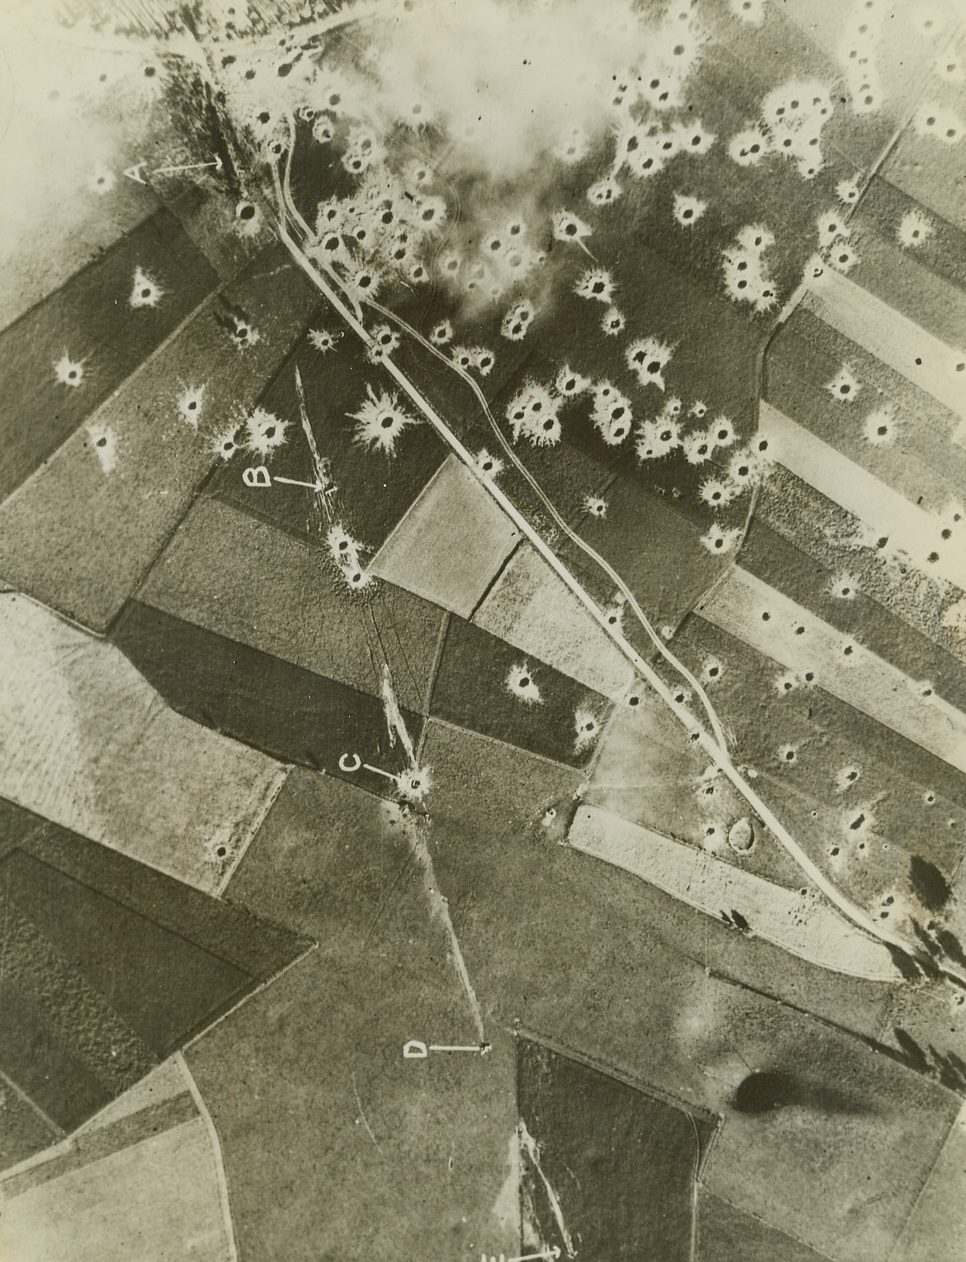 FLYING BOMB SITE BLASTED, 8/15/1944. FRANCE—A reconnaissance photo of a German Robot flying bomb site in the Pas de Calais area which has been attacked by Allied aircraft. Letter A, shows the launching platform surrounded by bomb craters. B,C,D, and E are flying bombs which have crashed on launching. Credit Line (British Official Photo from ACME);